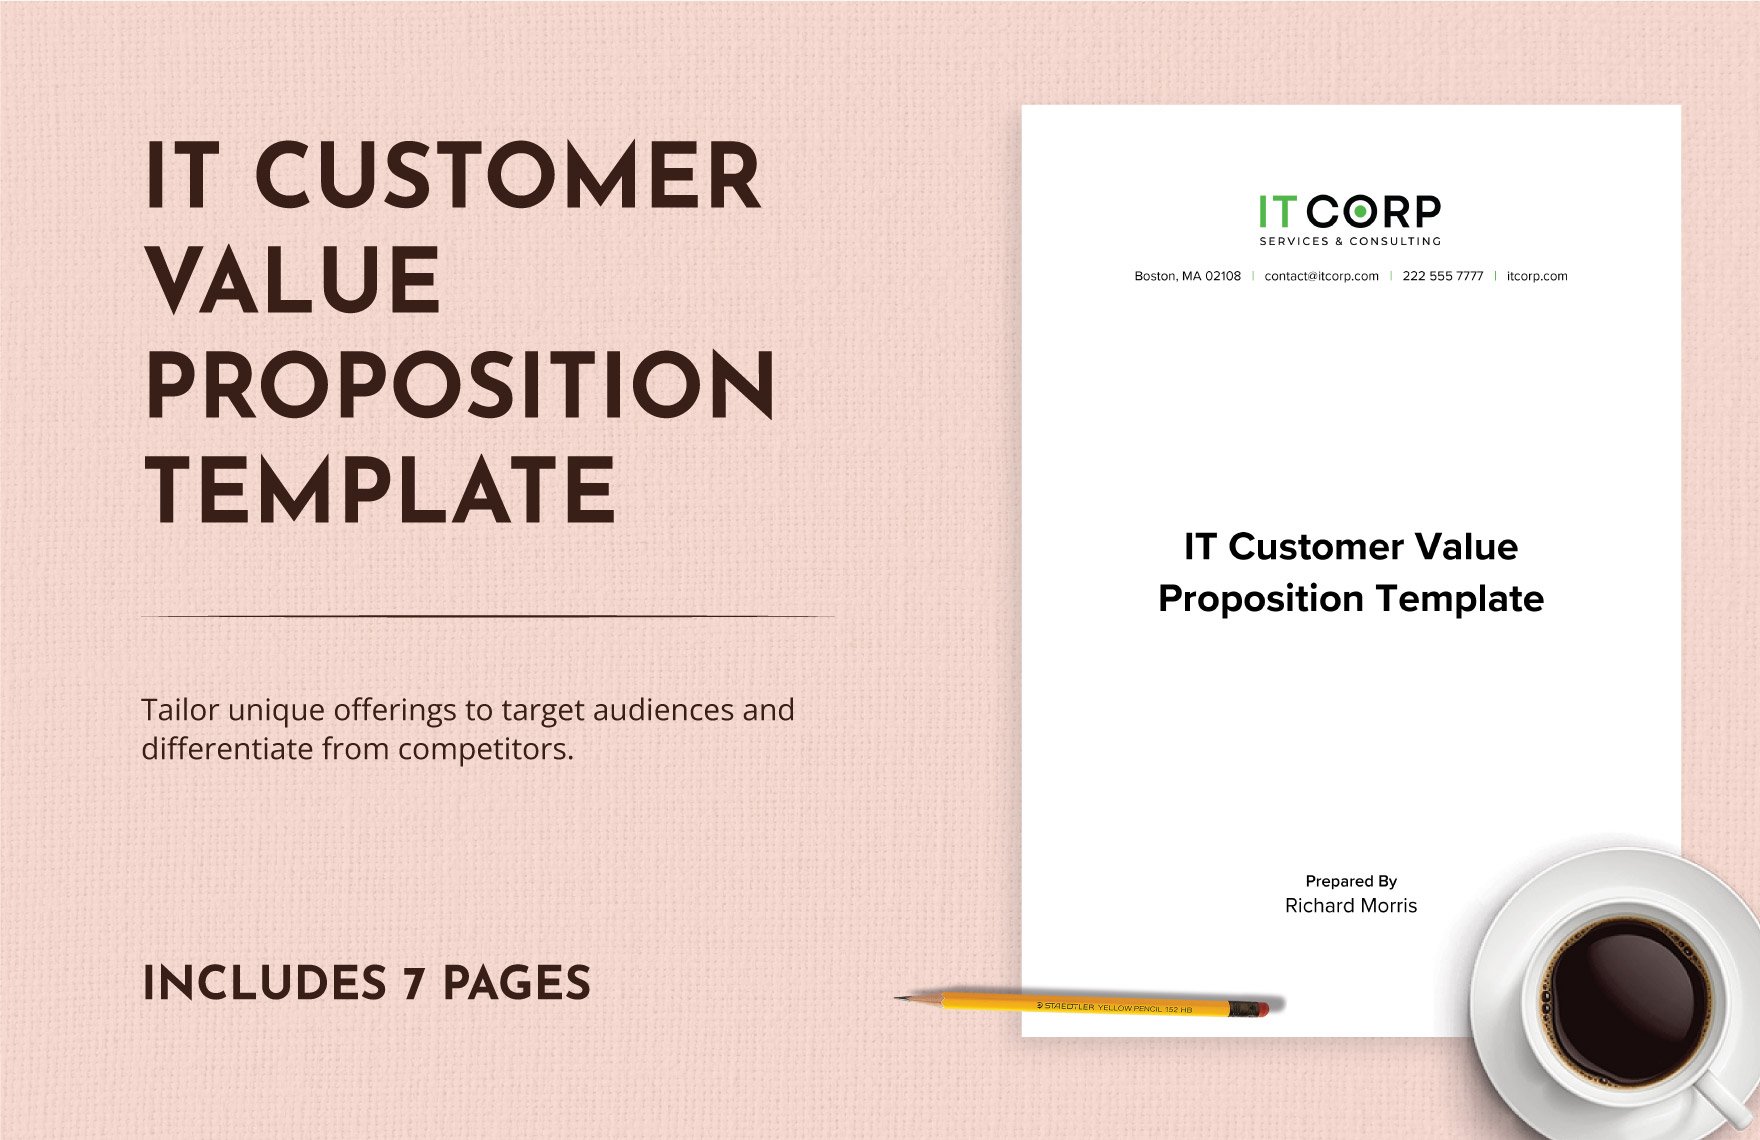 IT Customer Value Proposition Template in Word, Google Docs, PDF